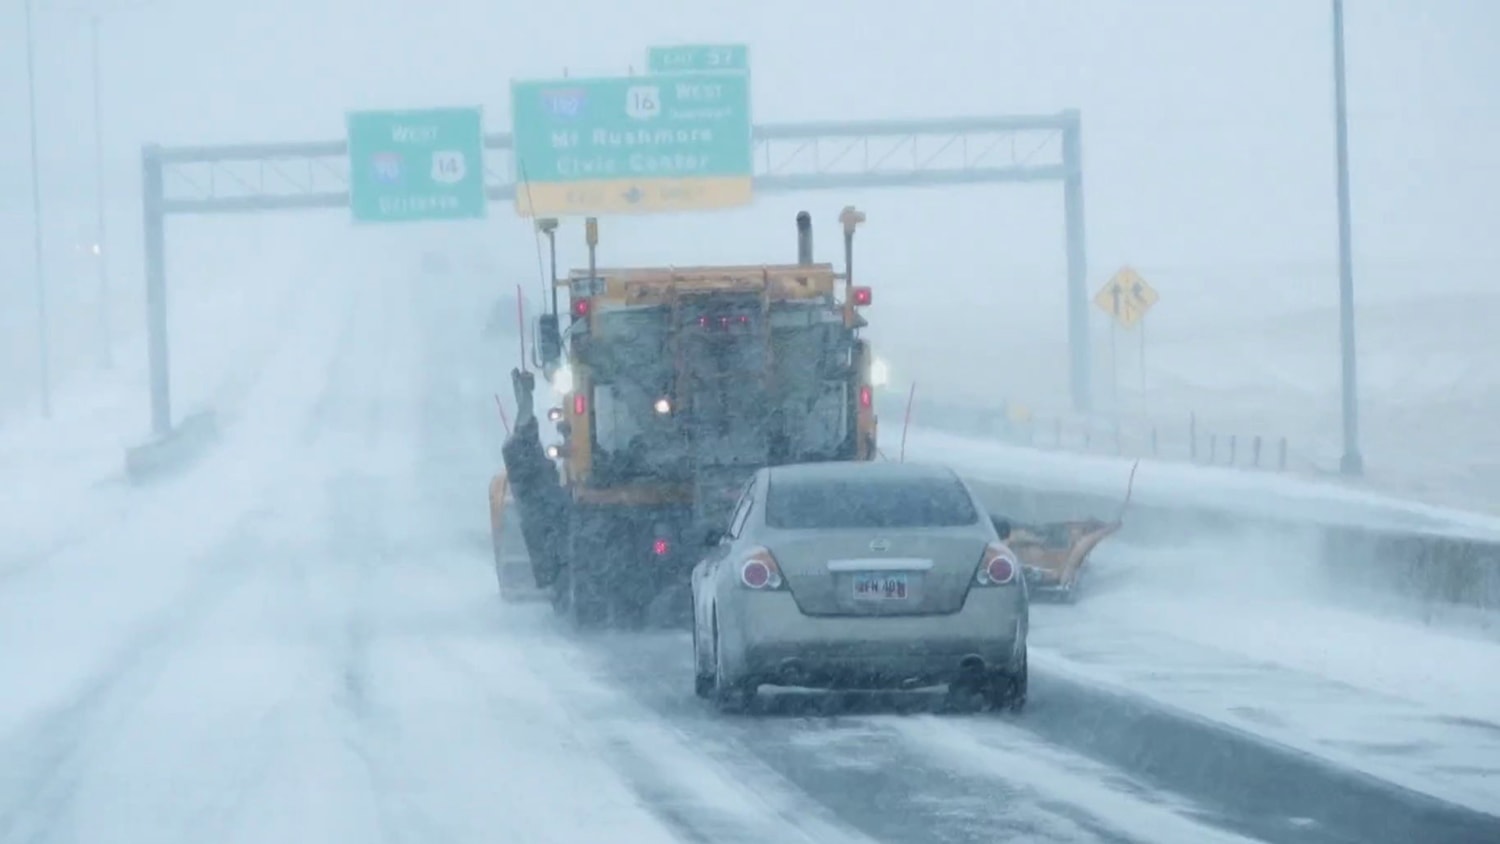 Airport, Northtowns lead the way in blizzard snowfall